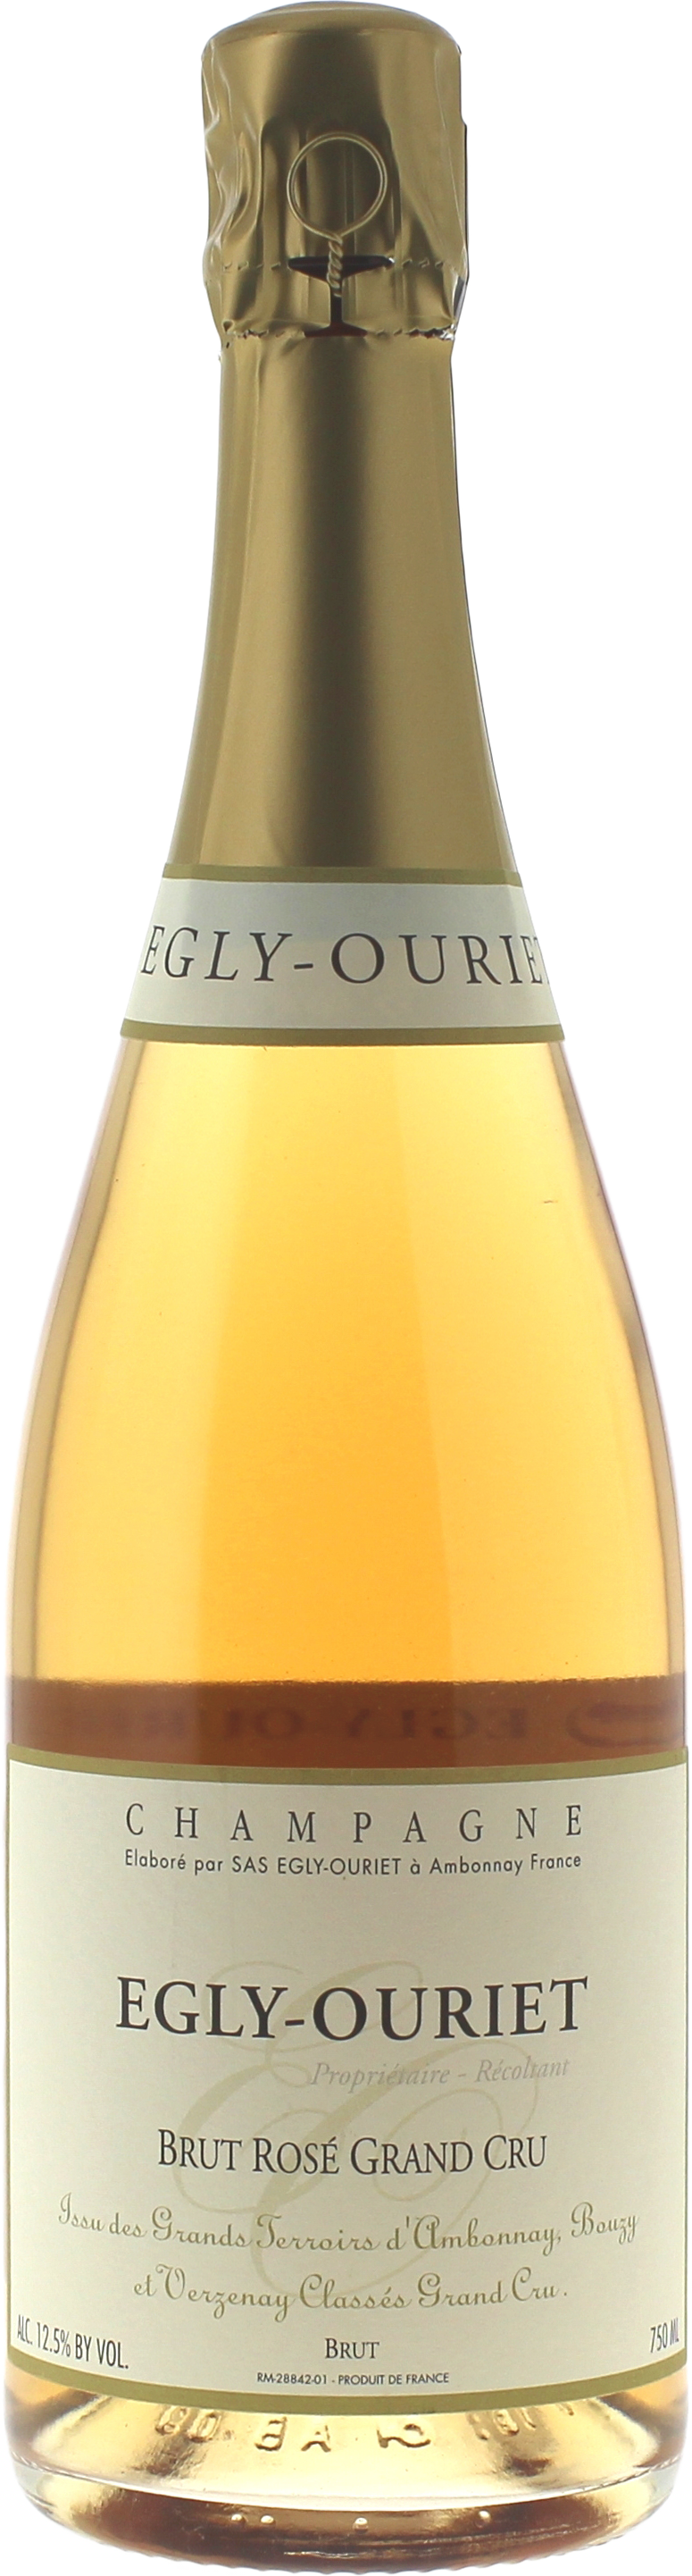 Egly ouriet ros grand cru 2013  EGLY OURIET, Champagne